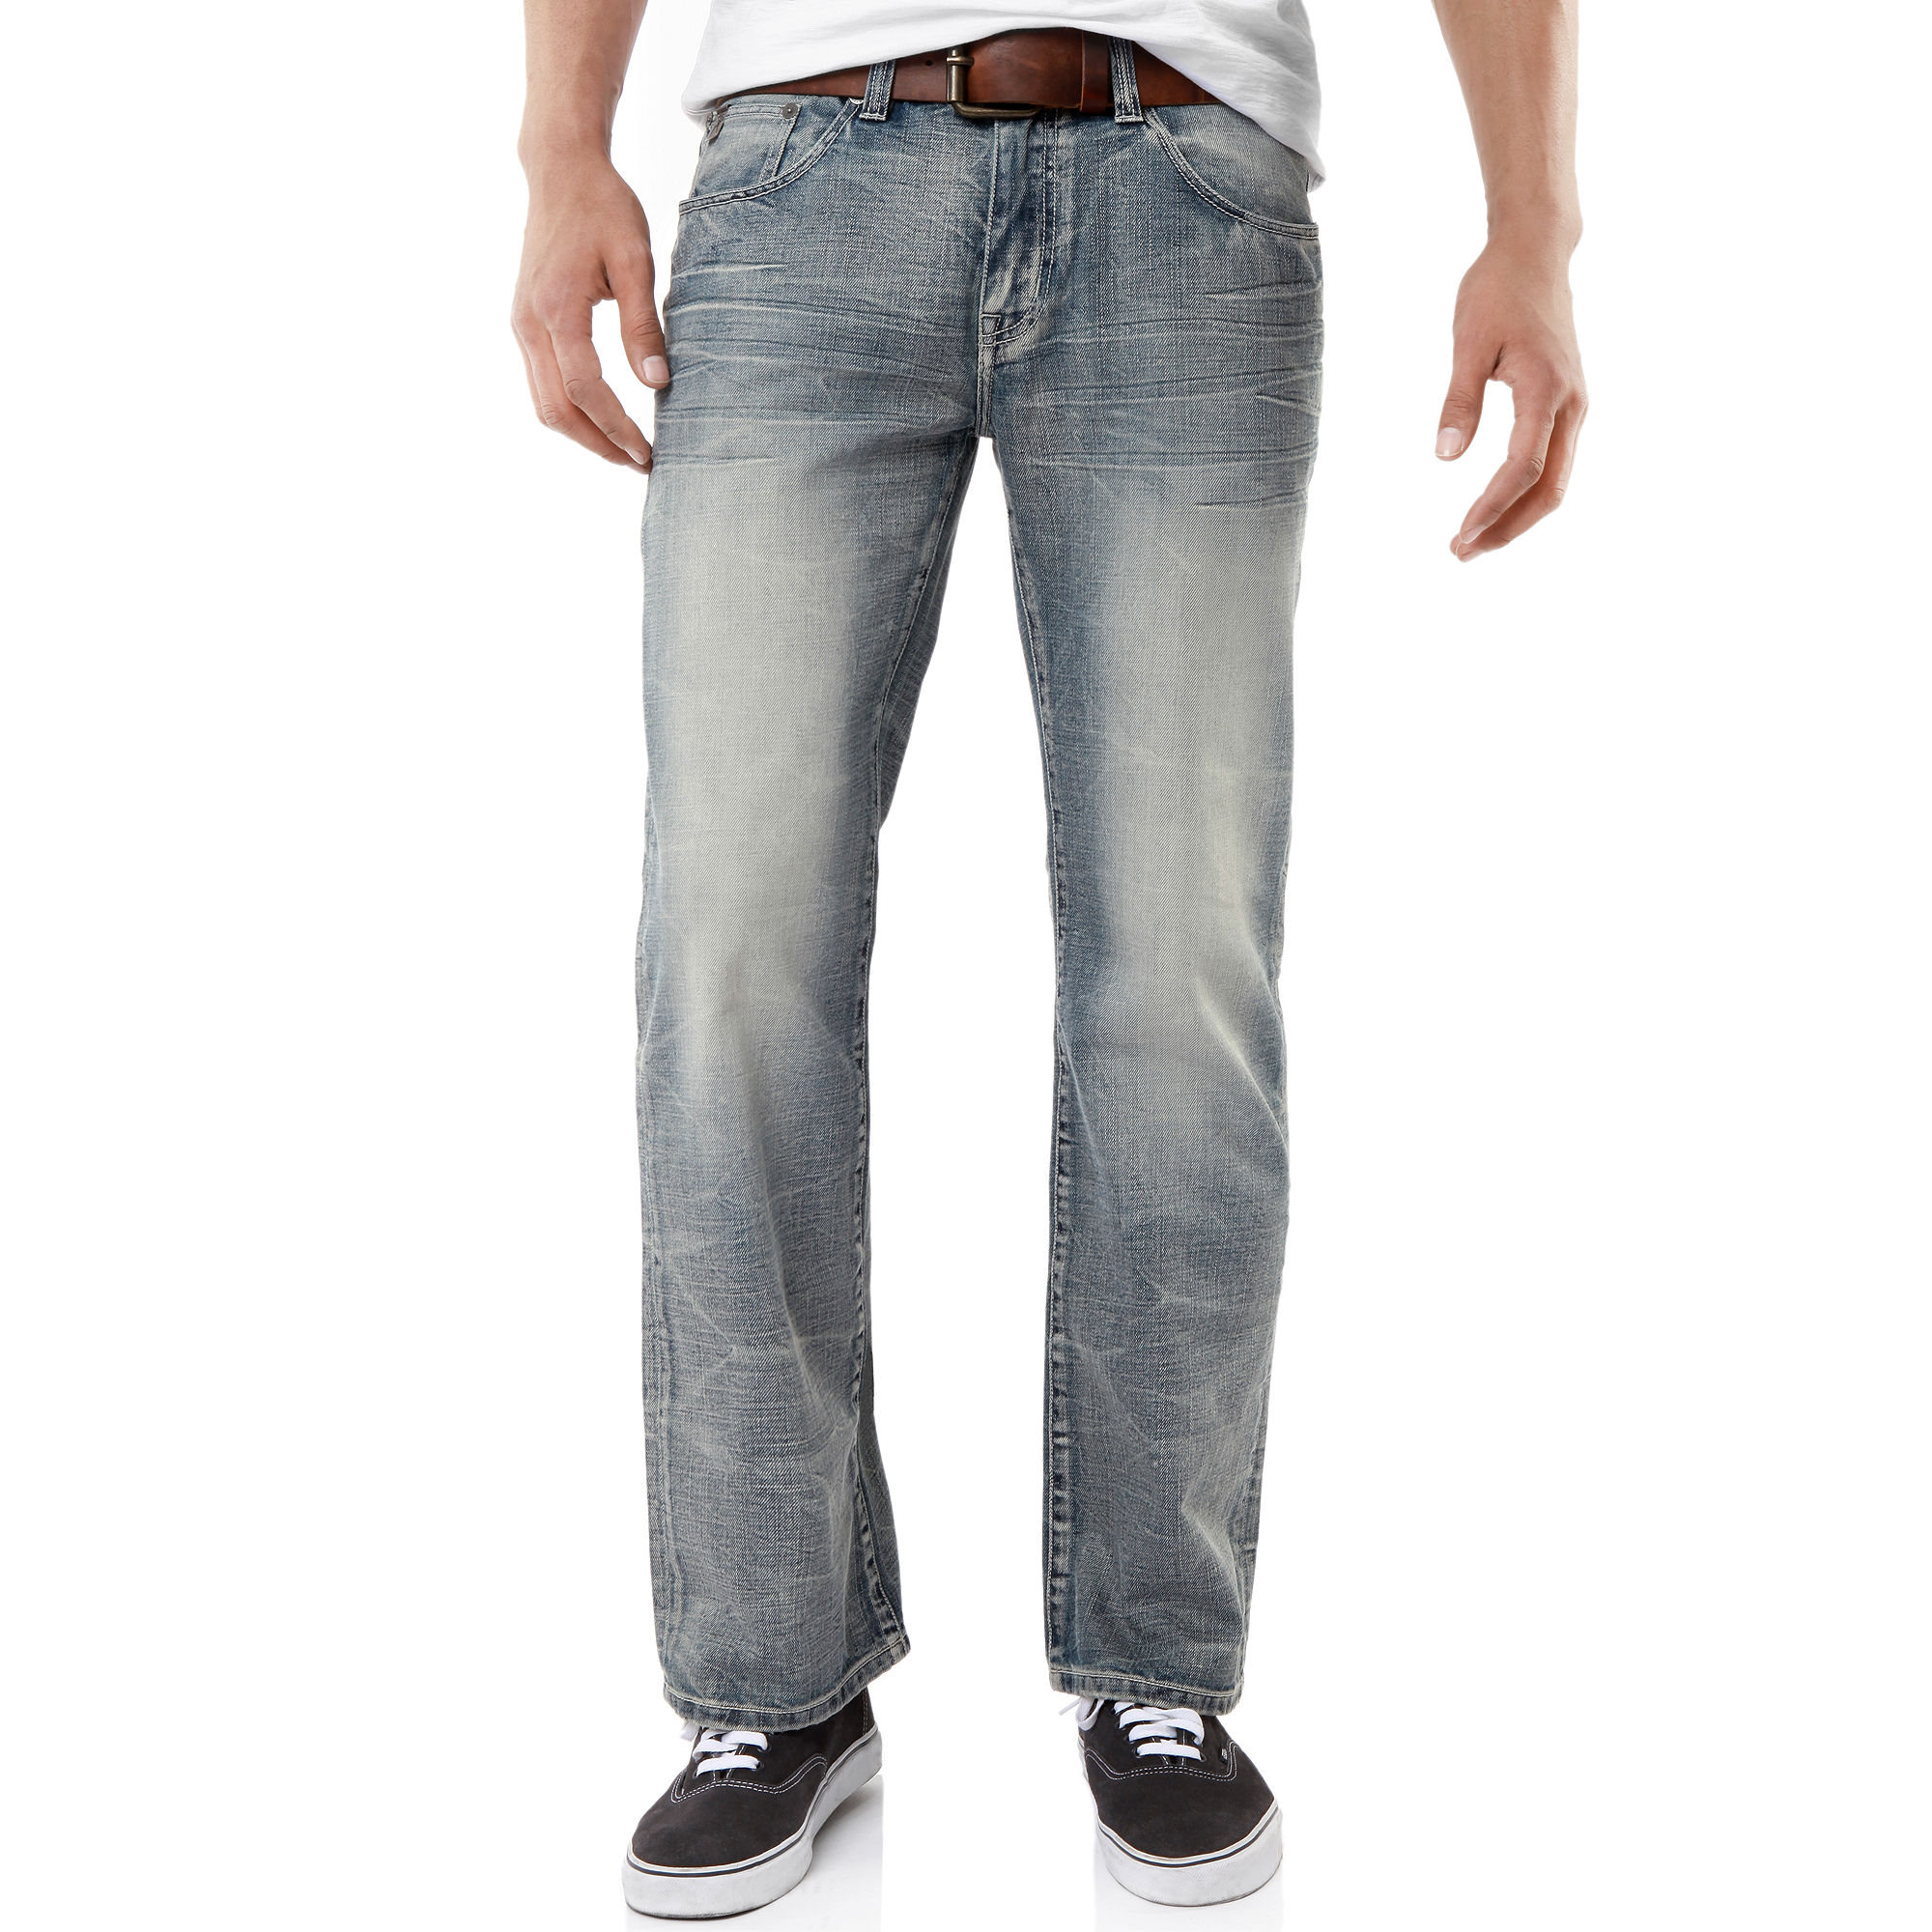 Lyst - Marc ecko Jeans Bootcut Faded Crystal Wash in Blue for Men